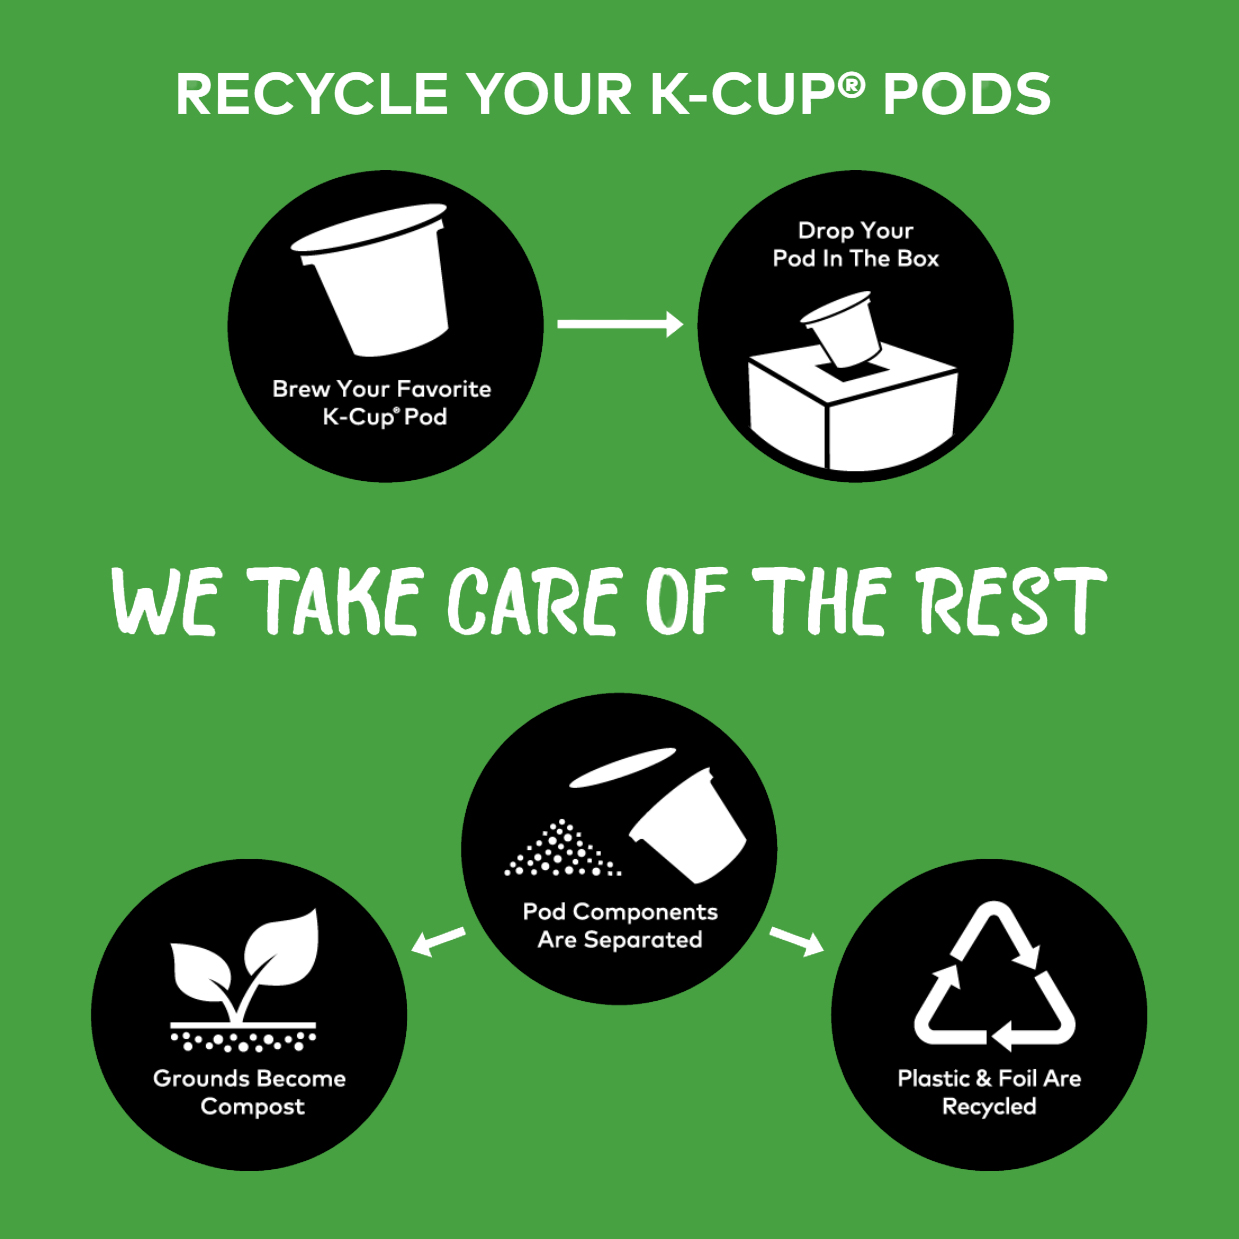 Grounds to Grow On K Cup Recycling